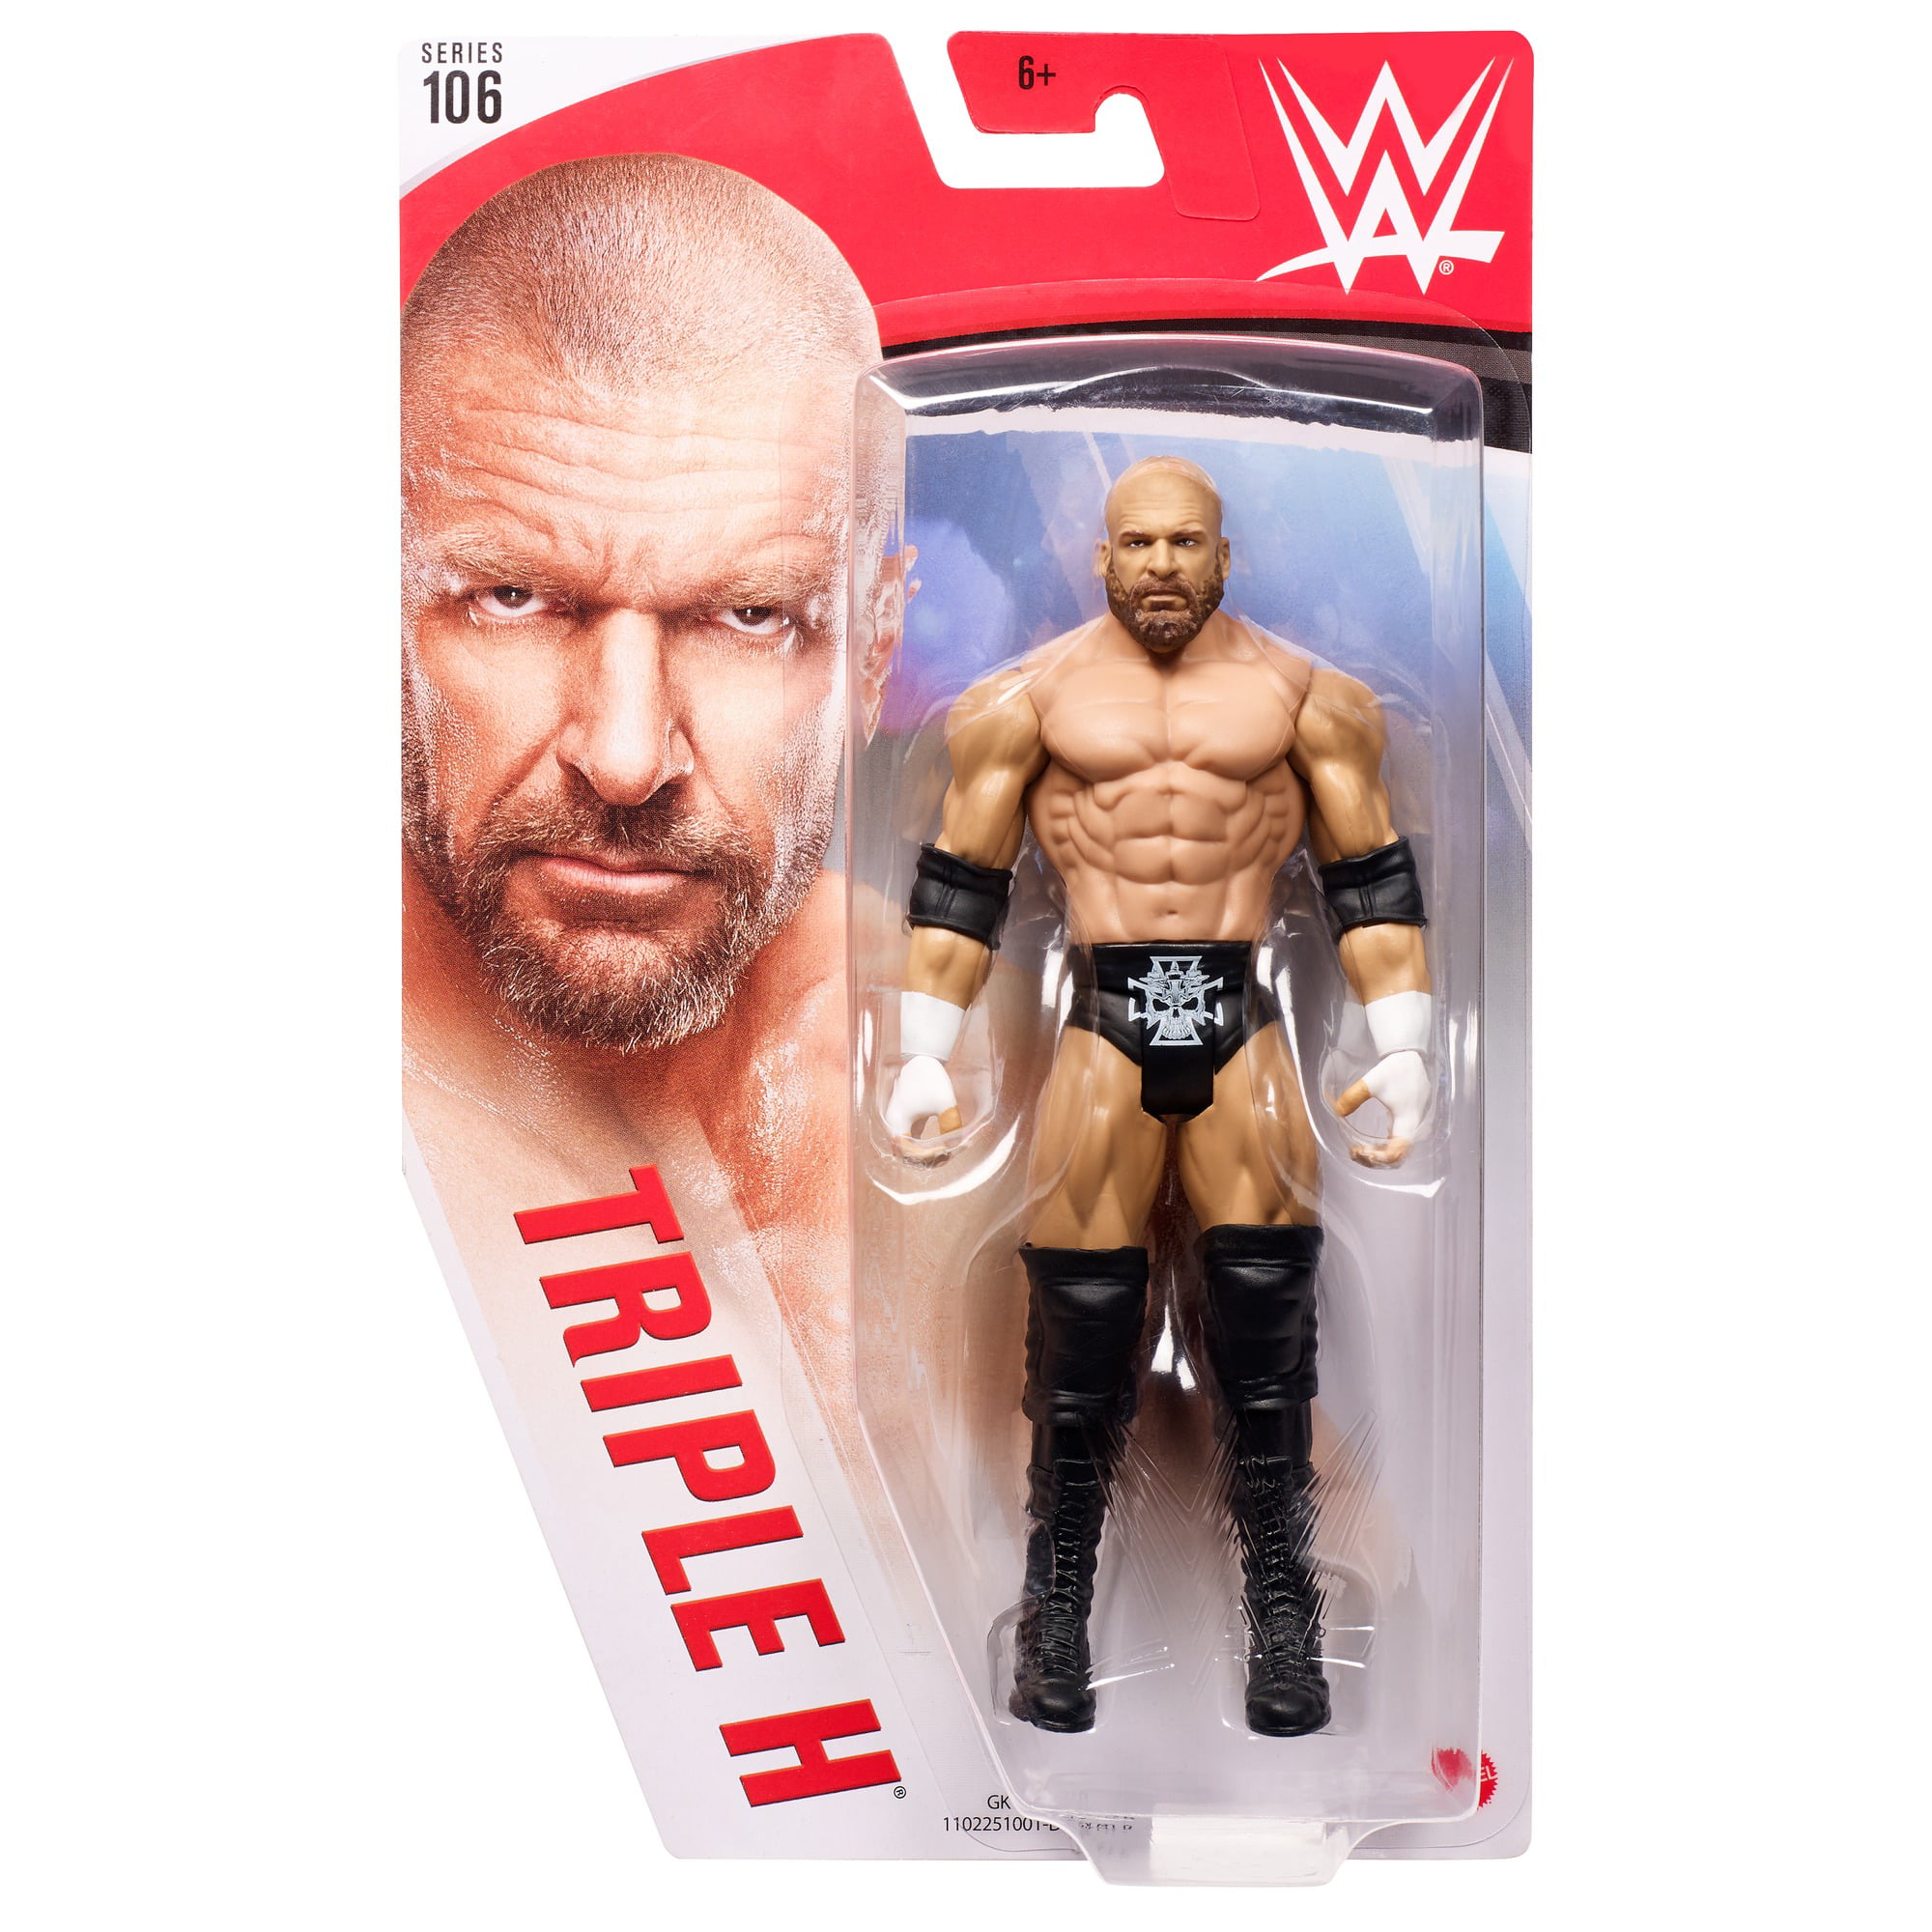 WWE Triple H Action Figure Posable 6-in Collectible for Ages 6 Years Old and Up